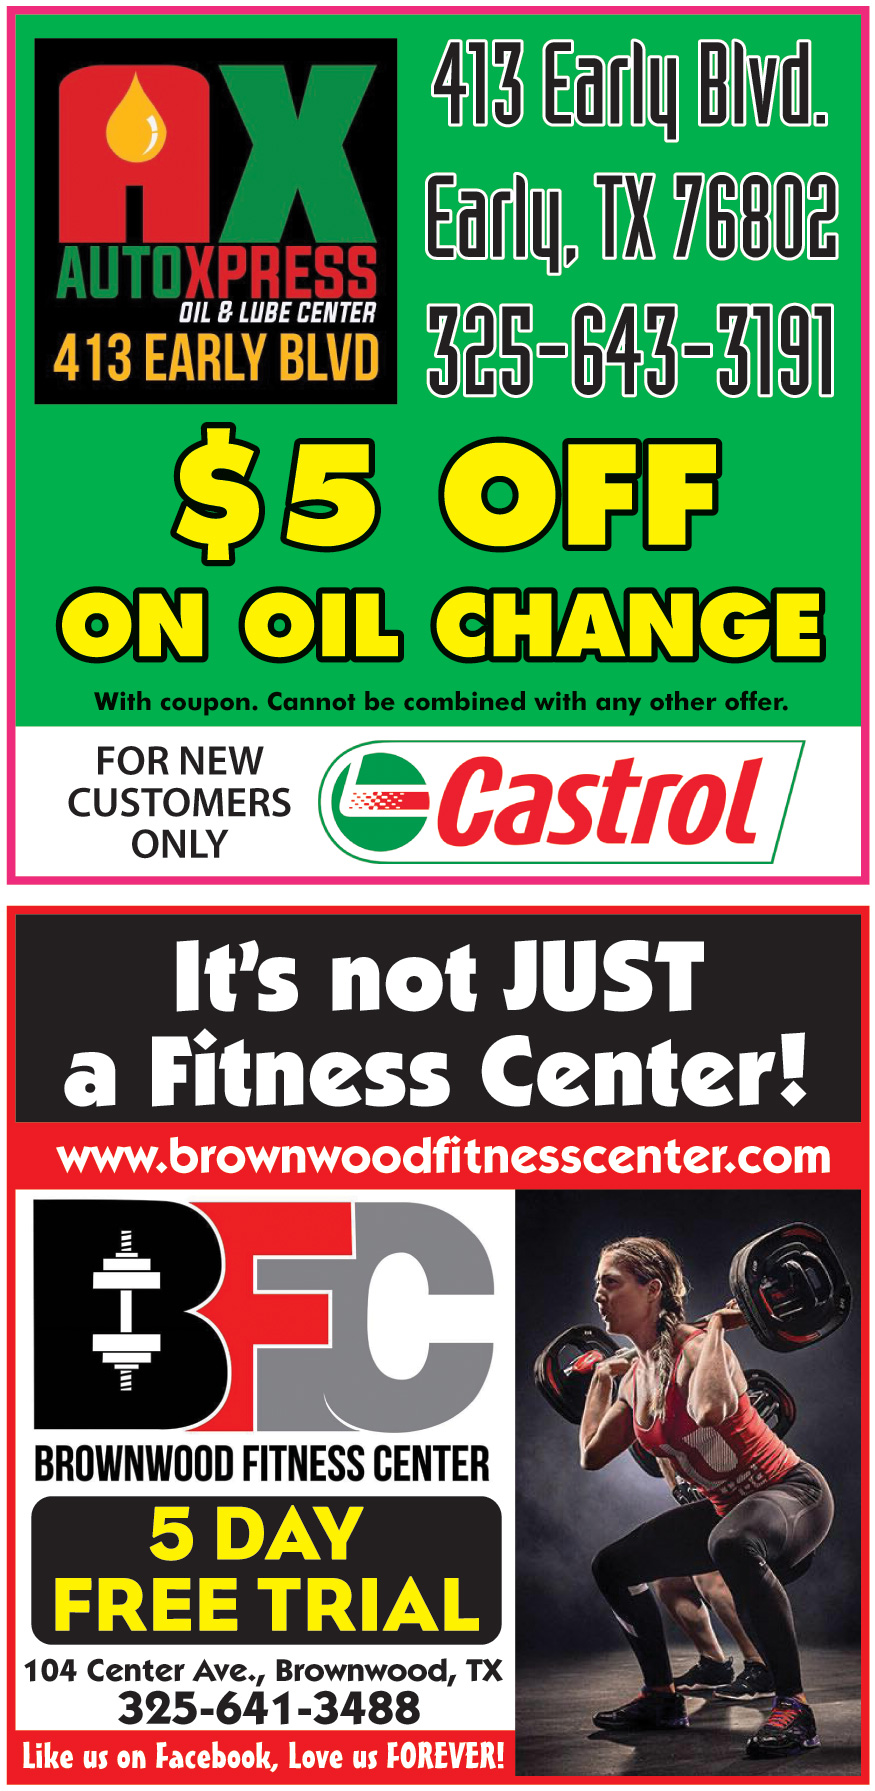 5-off-on-oil-change-online-printable-coupons-usa-local-free